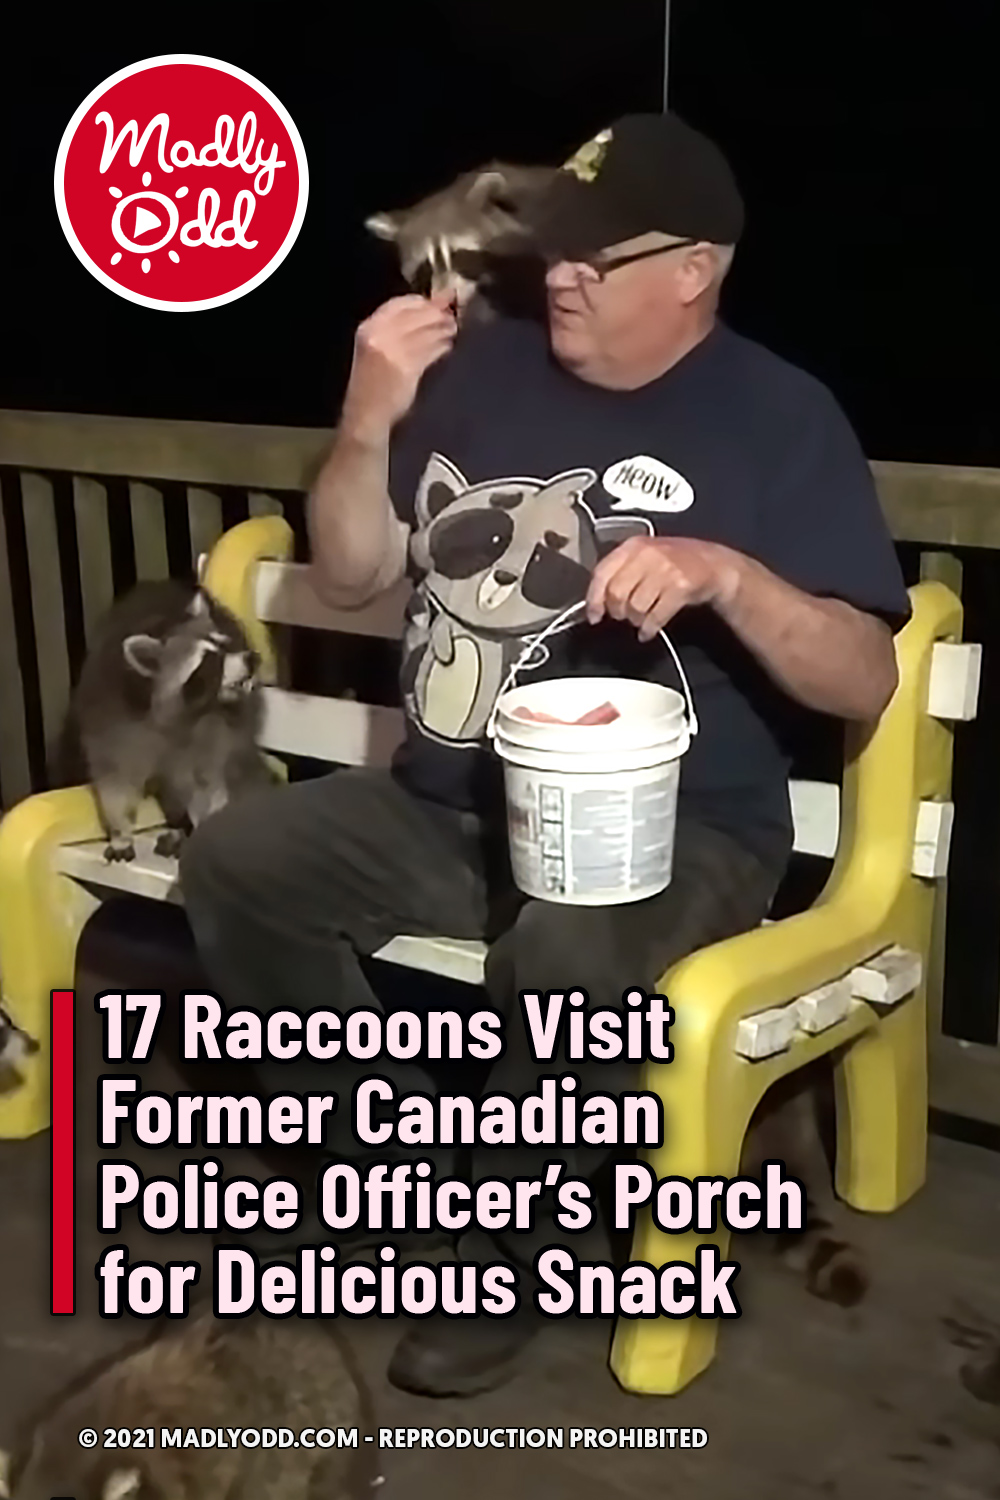 17 Raccoons Visit Former Canadian Police Officer’s Porch for Delicious Snack